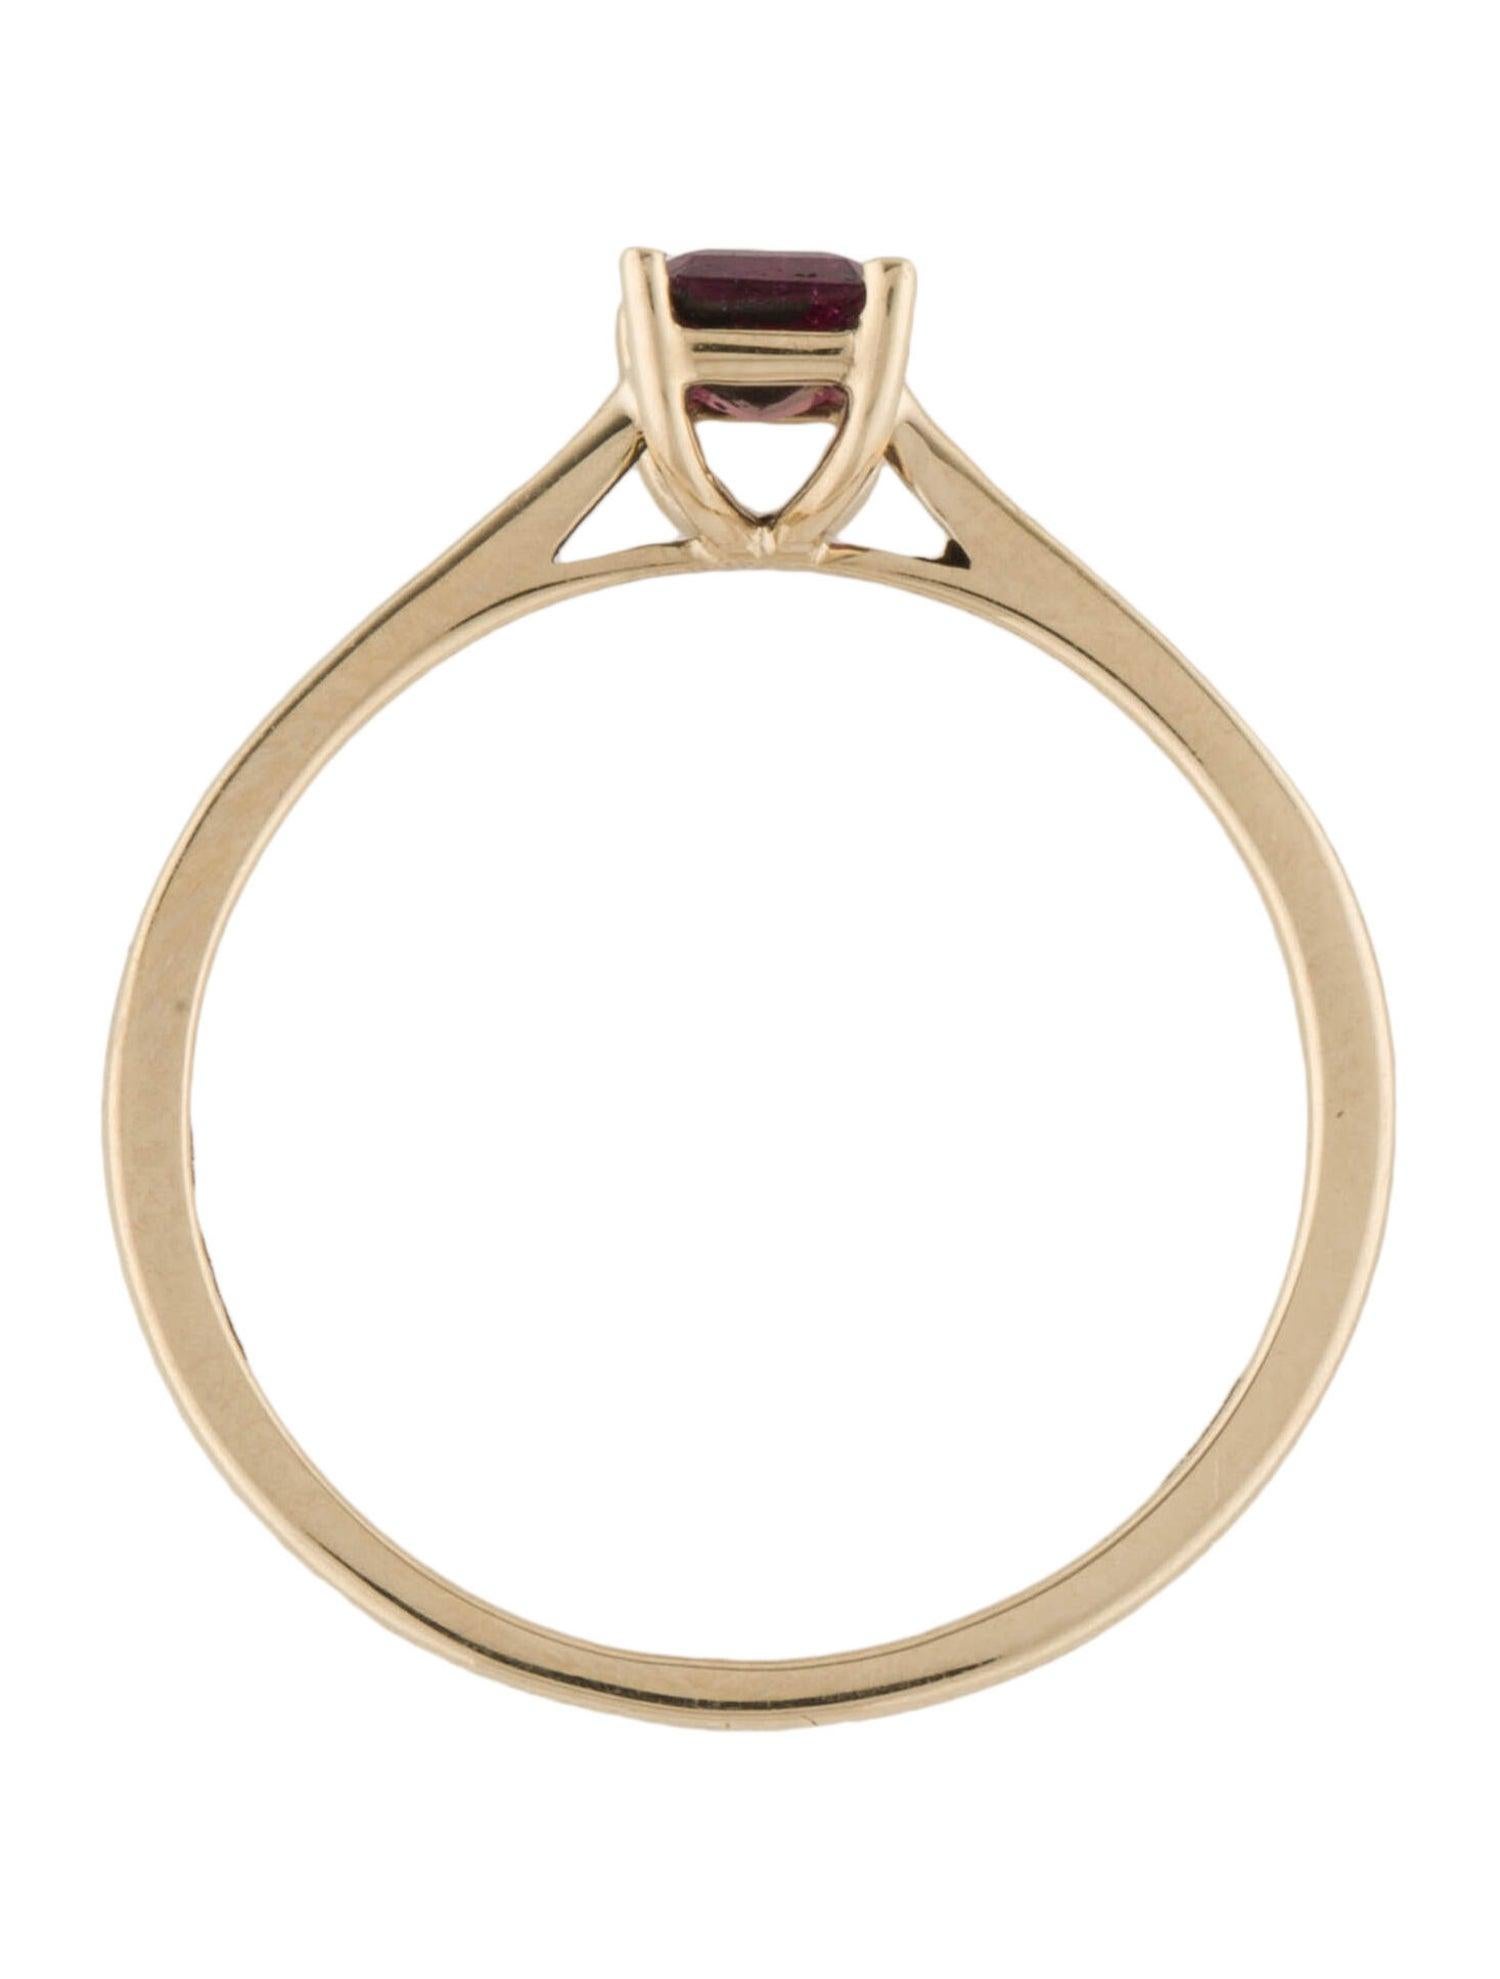 Elegant 14K Yellow Gold Garnet Cocktail Ring - Cornered Rectangular Step Cut In New Condition For Sale In Holtsville, NY